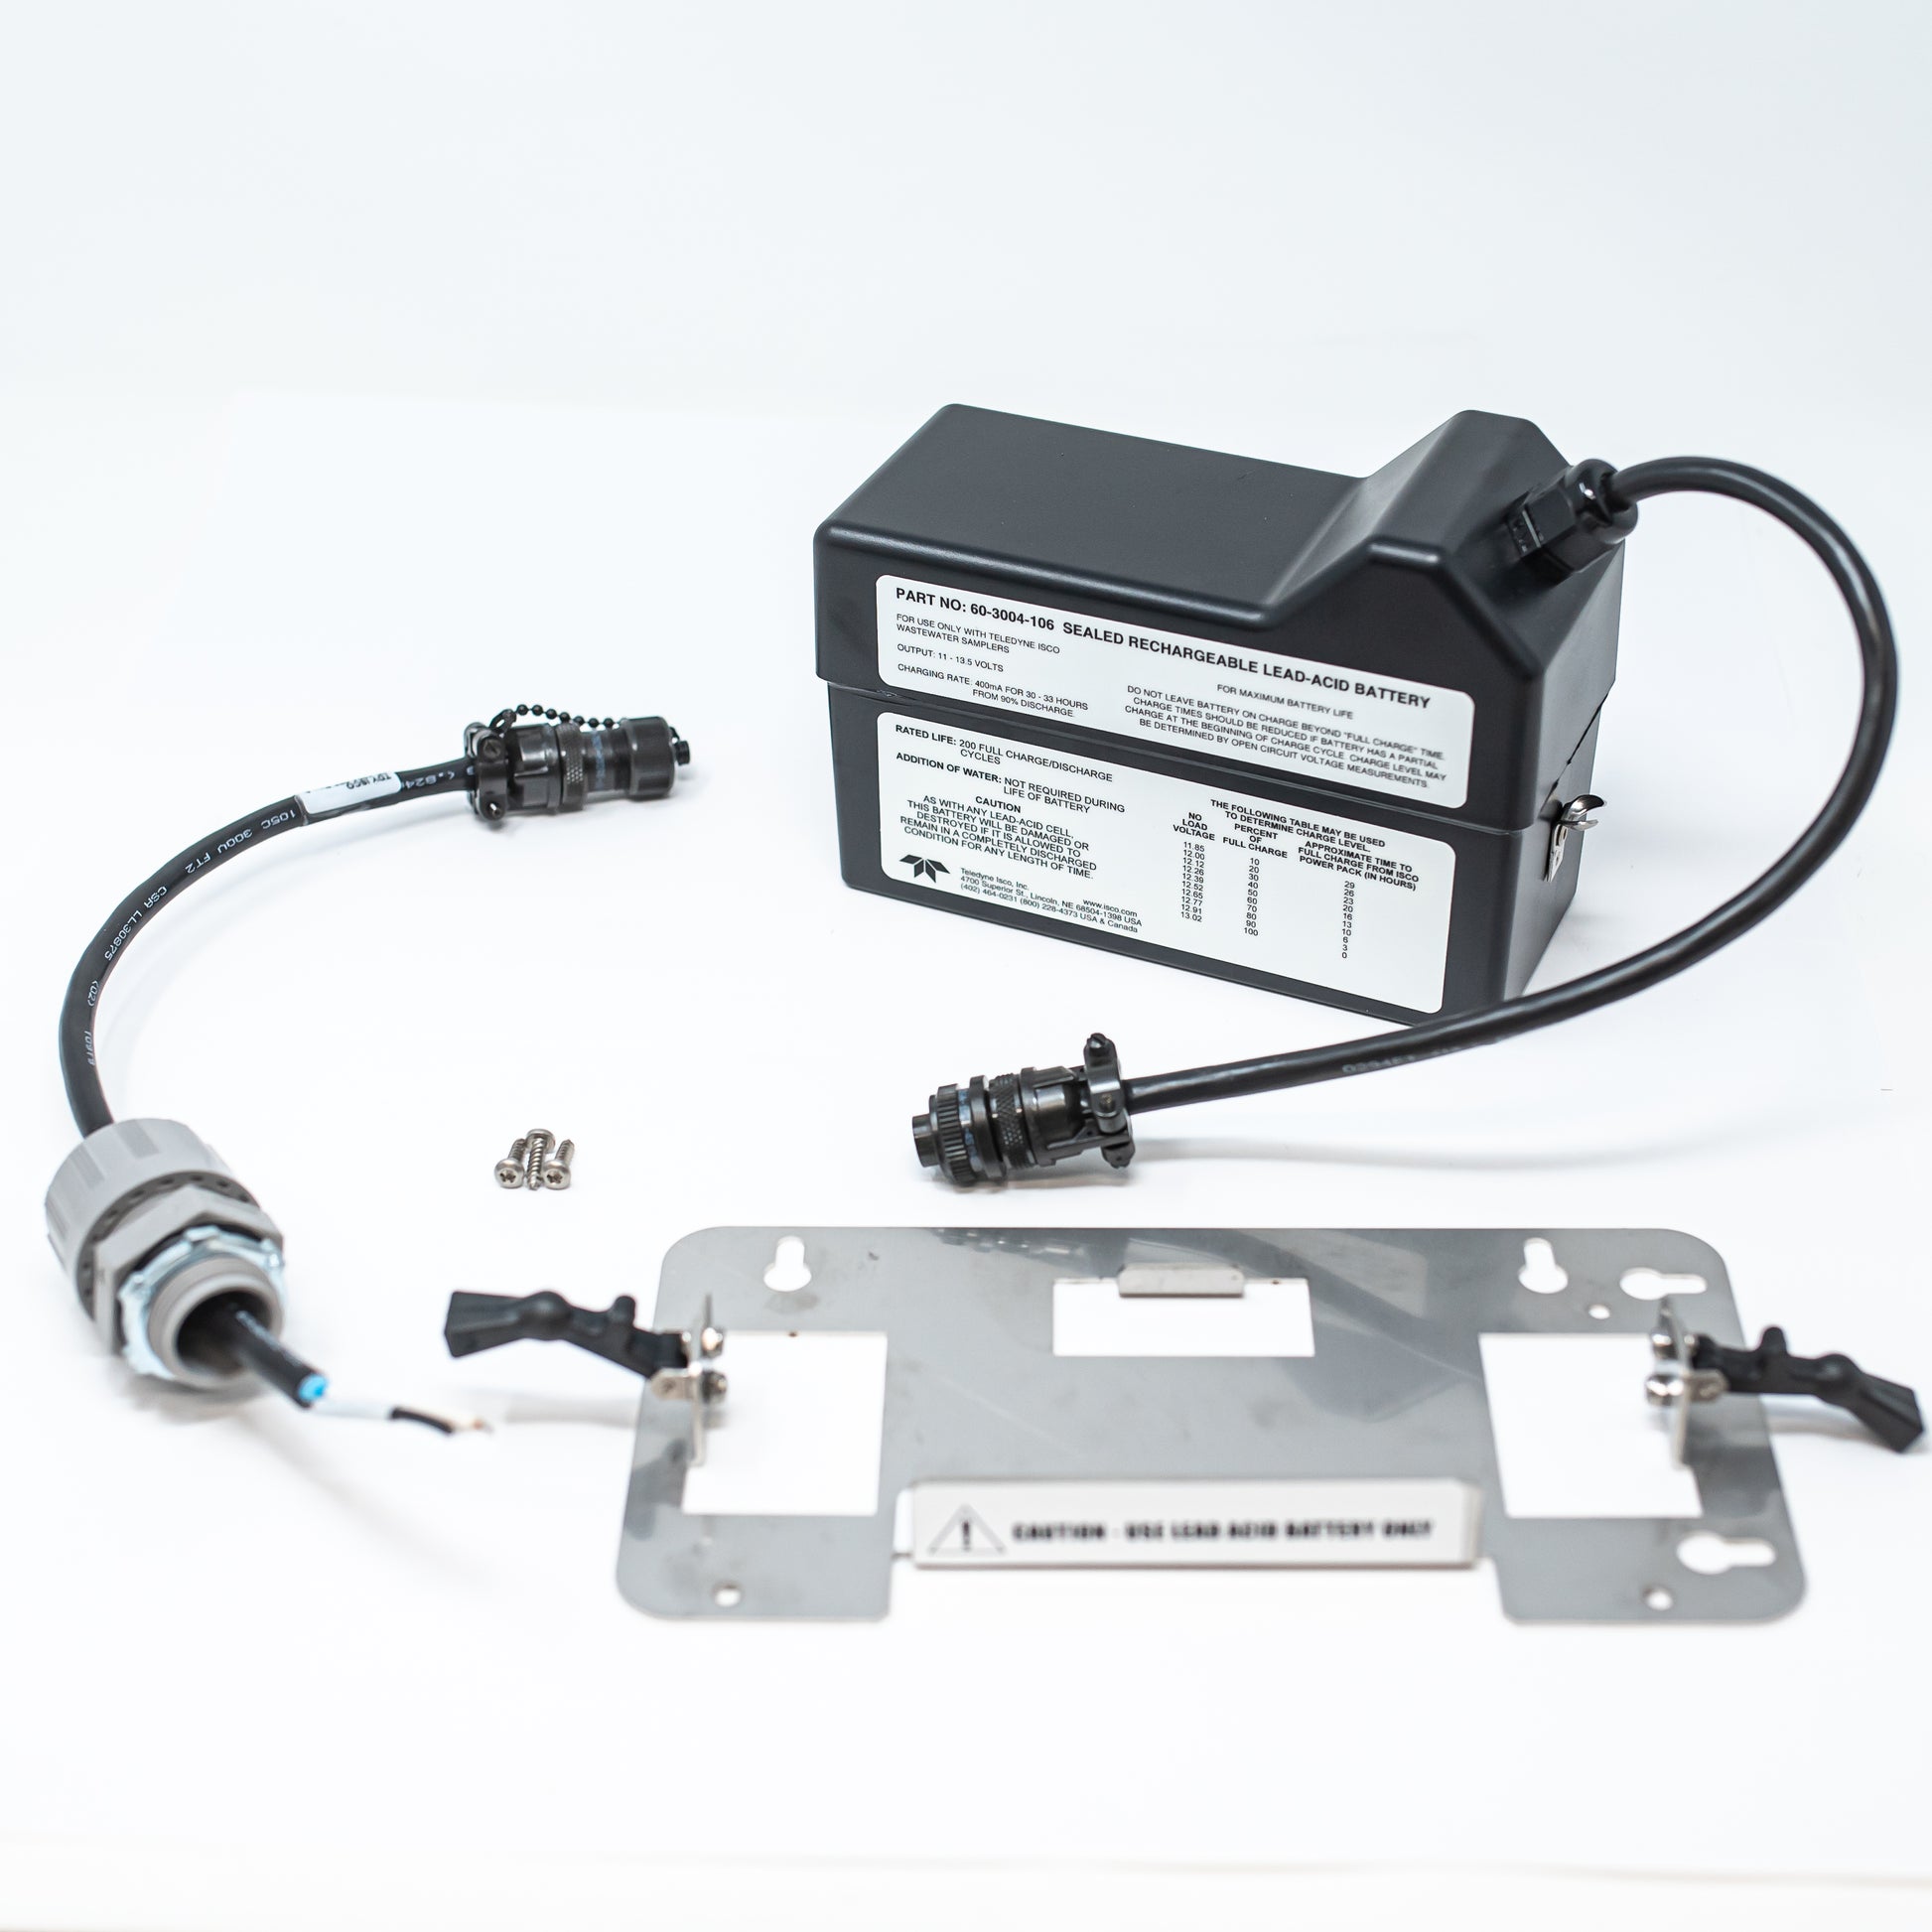 Battery backup kit.  Includes Lead Acid Battery, adapter cable and mounting hardware.